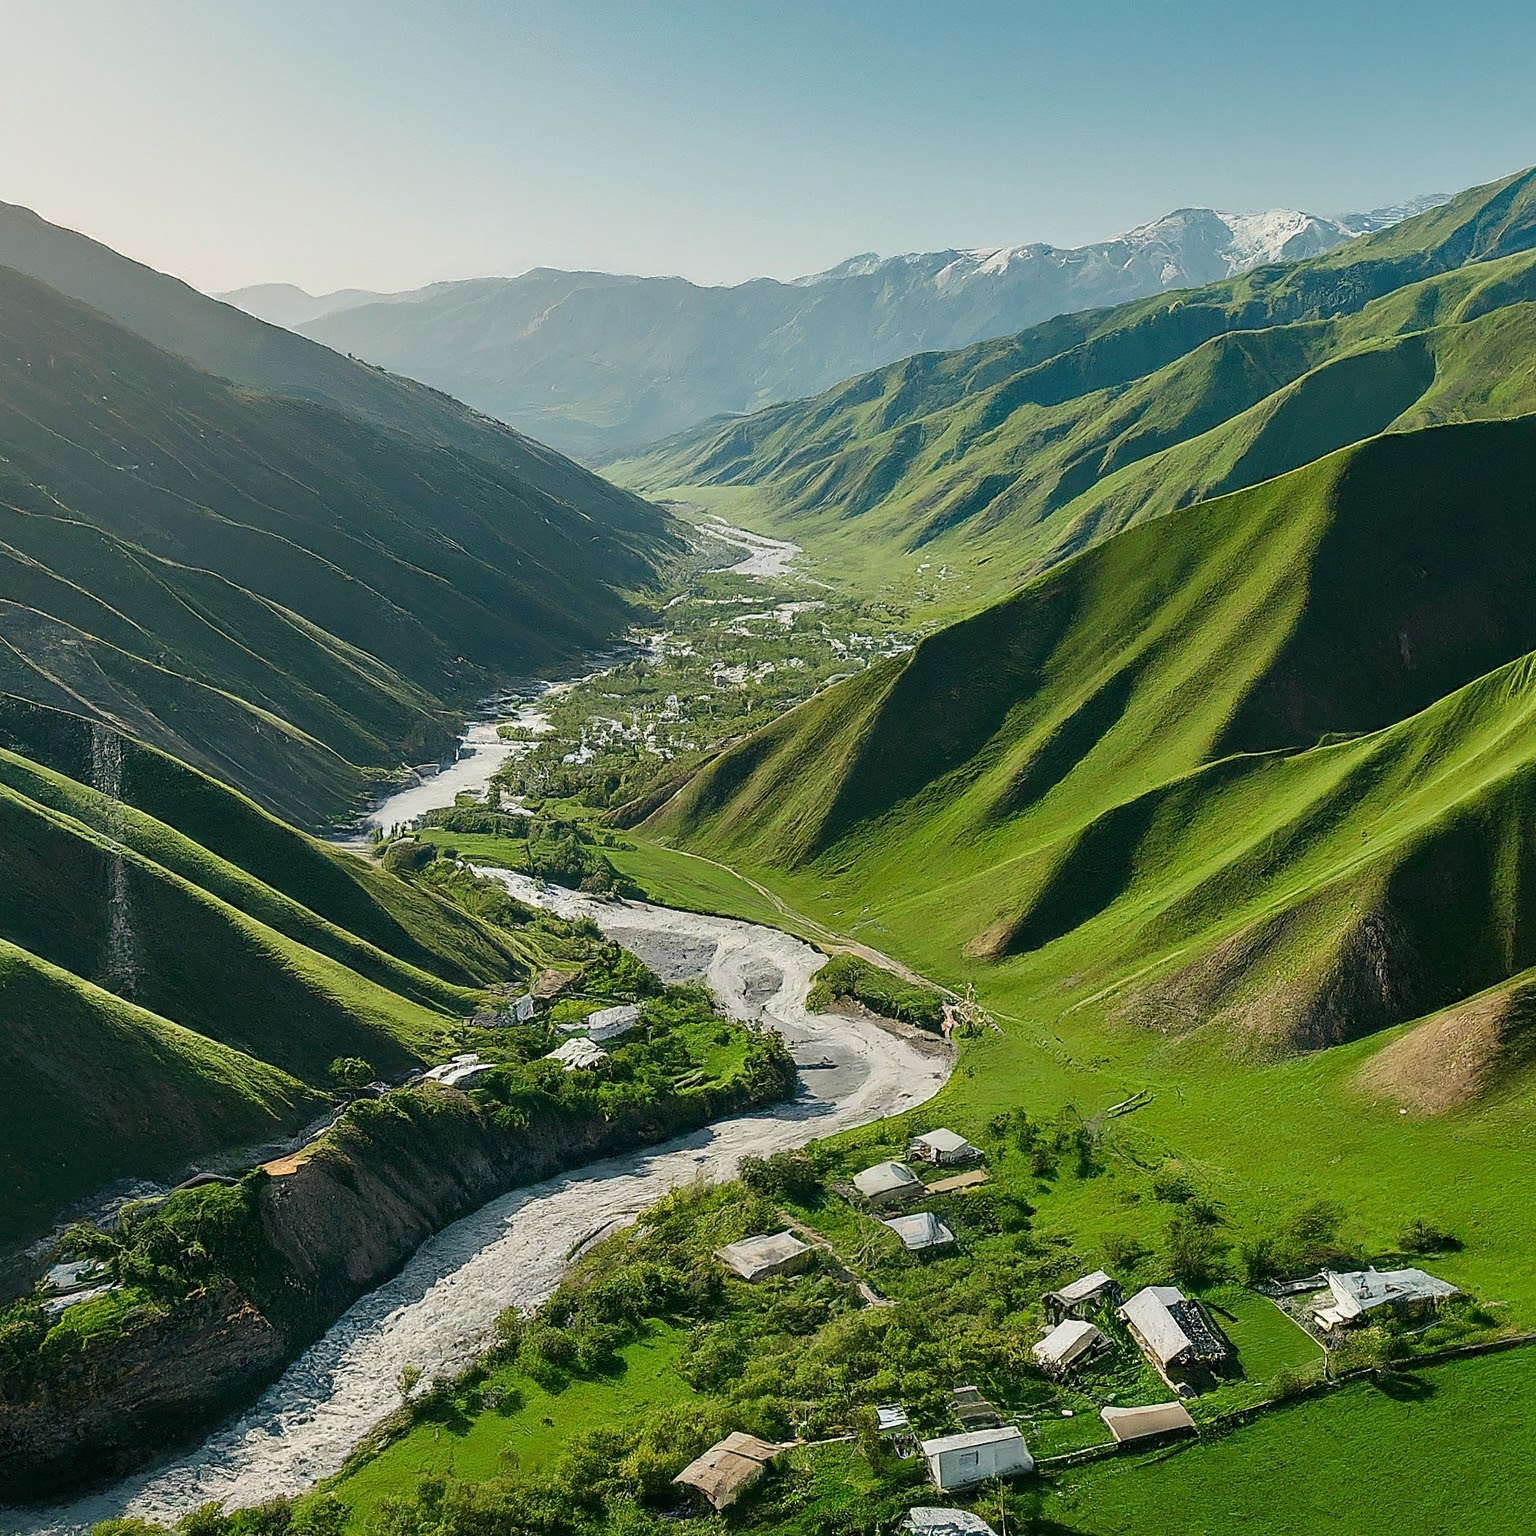 Lush green valley of Nuratau Mountains in Uzbekistan with villages, orchards, and river.